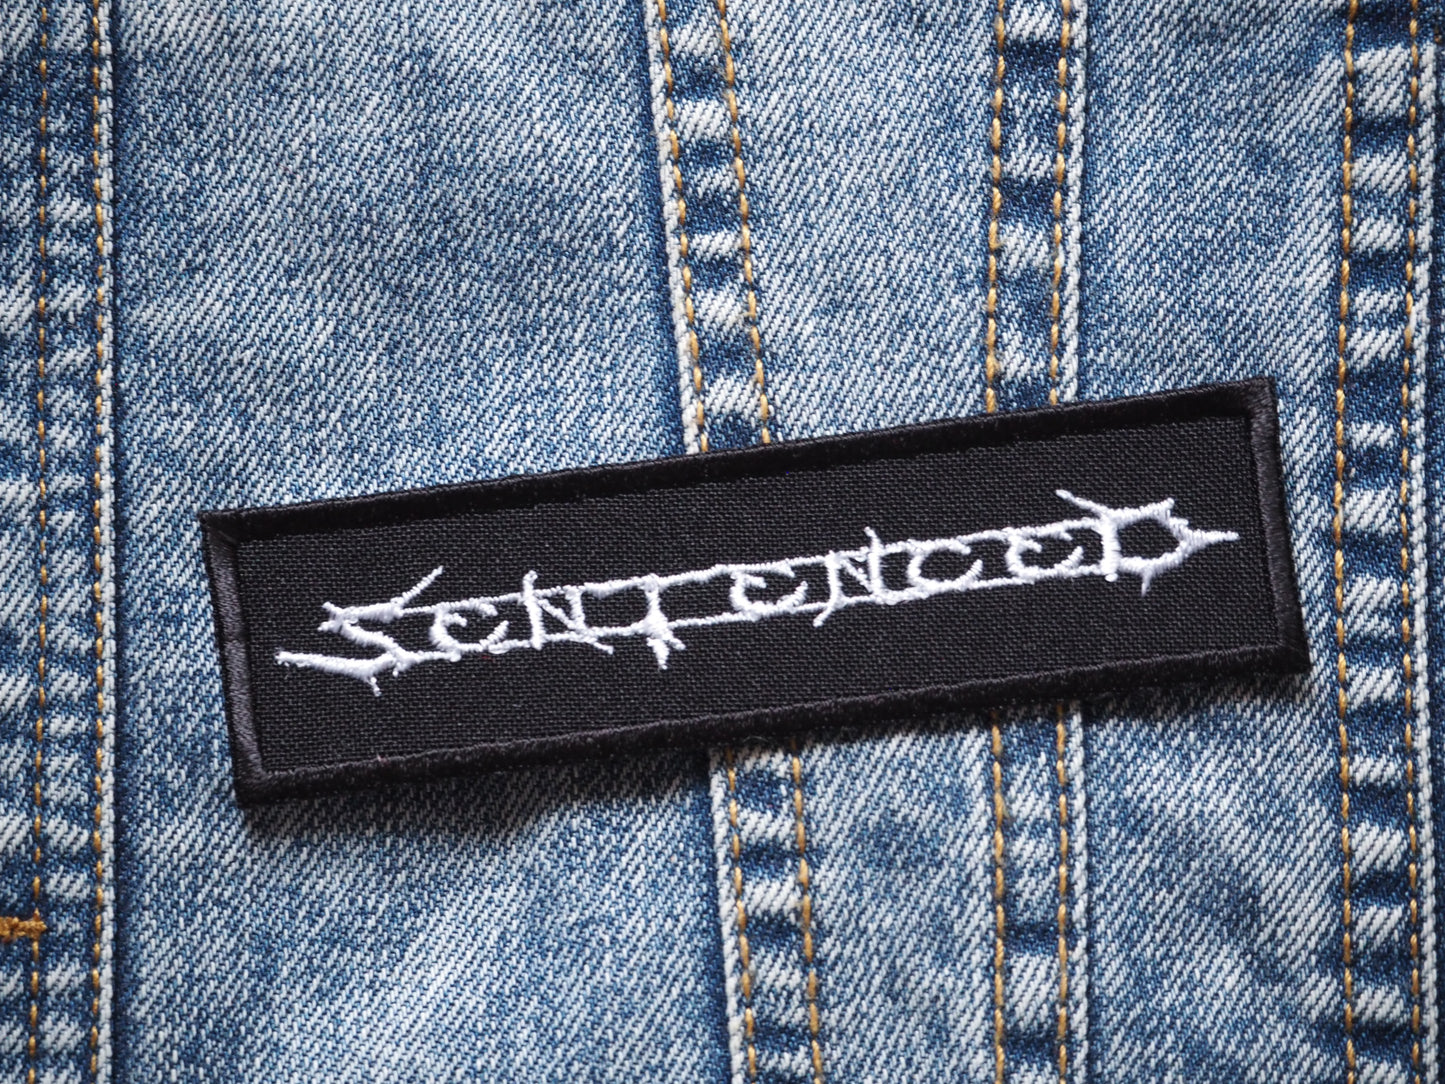 Sentenced Patch Embroidered